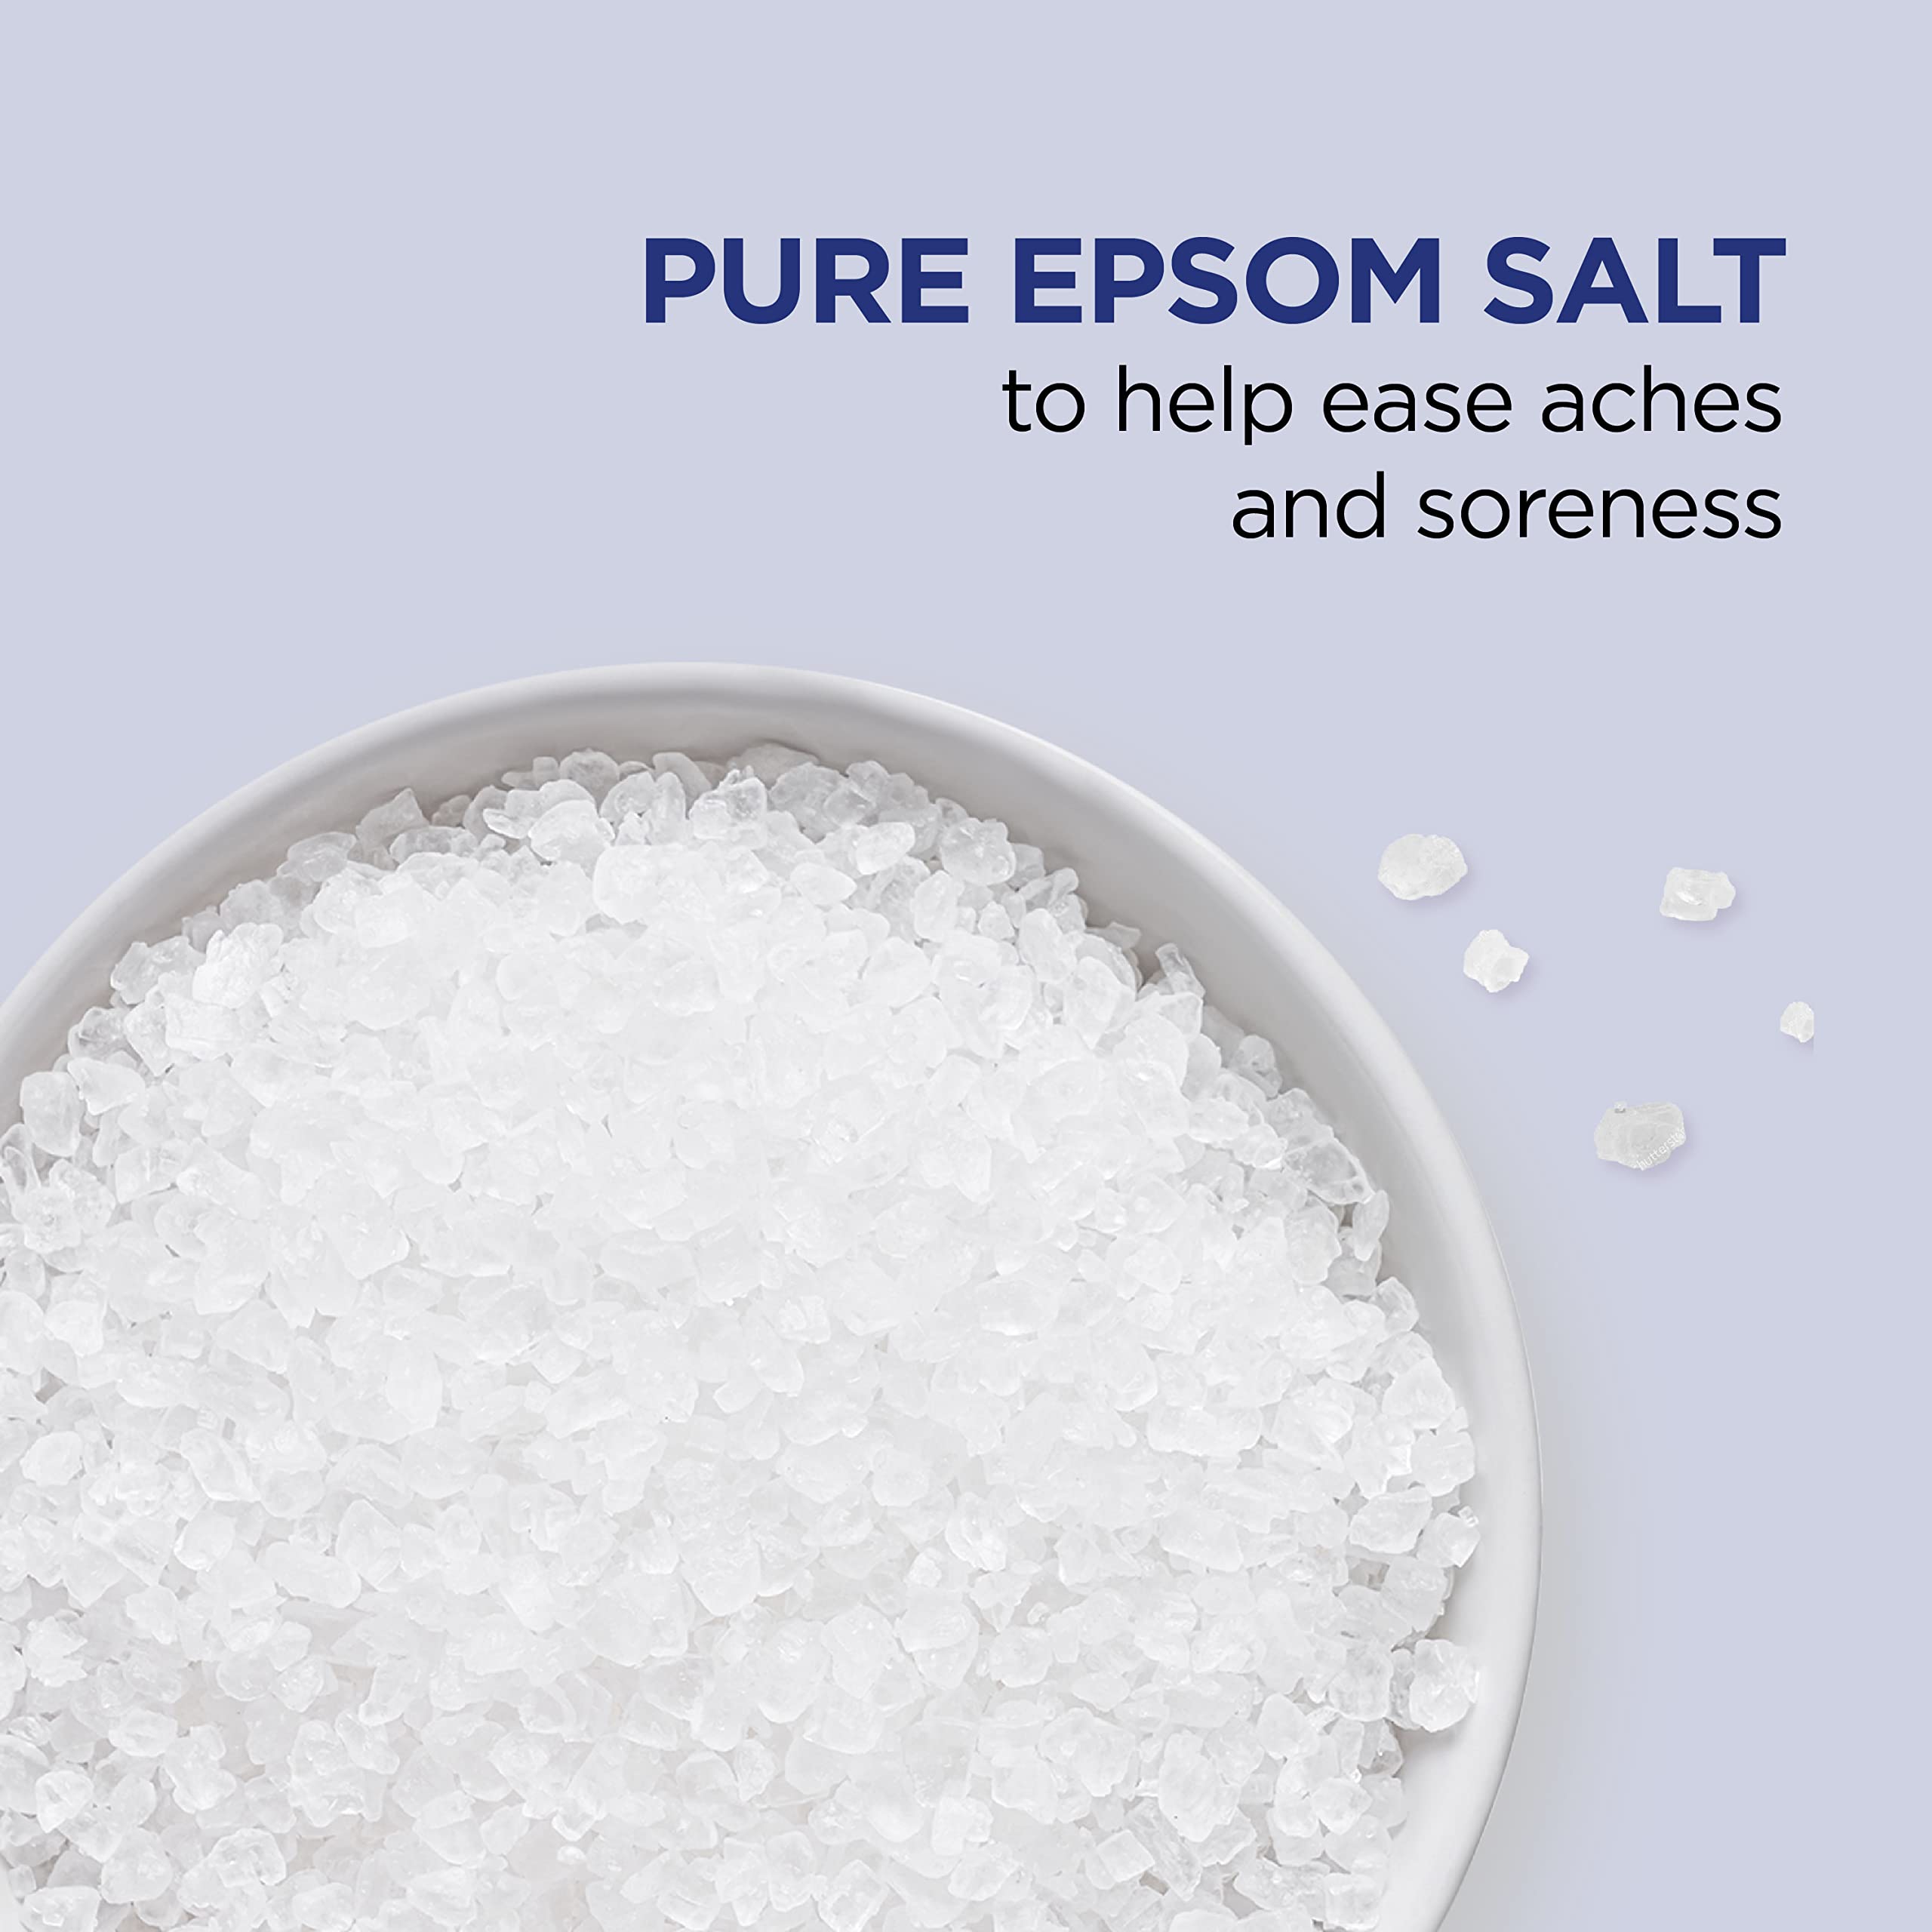 Dr Teal's Pure Epsom Salt Soak, Fragrance Free, 4 lbs (Packaging May Vary)